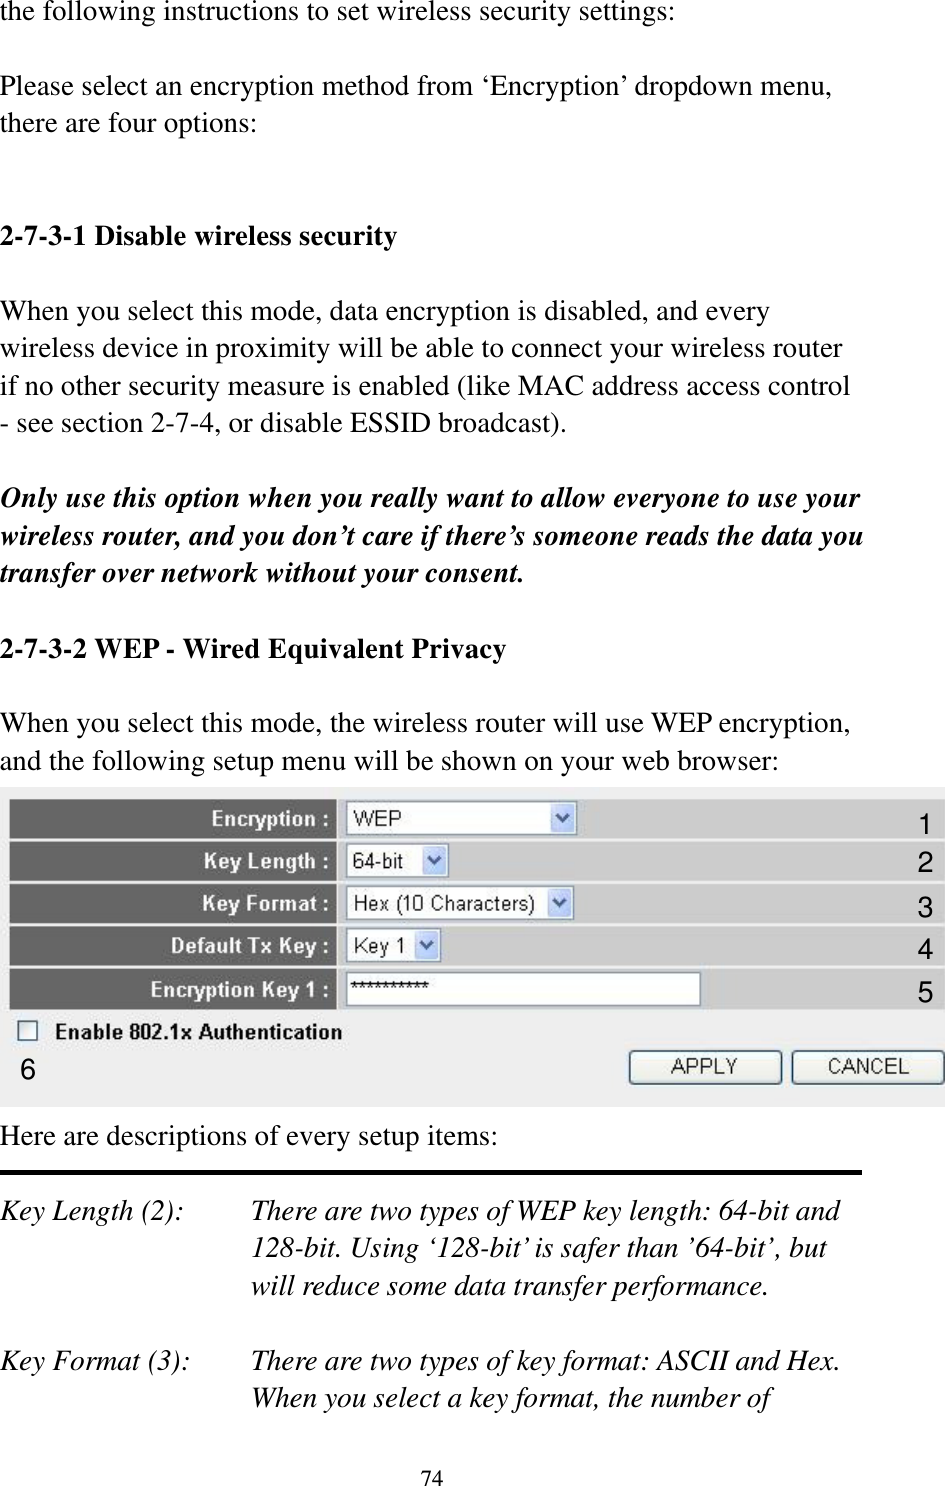 74 the following instructions to set wireless security settings:  Please select an encryption method from ‘Encryption’ dropdown menu, there are four options:   2-7-3-1 Disable wireless security  When you select this mode, data encryption is disabled, and every wireless device in proximity will be able to connect your wireless router if no other security measure is enabled (like MAC address access control - see section 2-7-4, or disable ESSID broadcast).    Only use this option when you really want to allow everyone to use your wireless router, and you don’t care if there’s someone reads the data you transfer over network without your consent.  2-7-3-2 WEP - Wired Equivalent Privacy  When you select this mode, the wireless router will use WEP encryption, and the following setup menu will be shown on your web browser:  Here are descriptions of every setup items:  Key Length (2):    There are two types of WEP key length: 64-bit and 128-bit. Using ‘128-bit’ is safer than ’64-bit’, but will reduce some data transfer performance.  Key Format (3):    There are two types of key format: ASCII and Hex. When you select a key format, the number of 123 5 6 4 